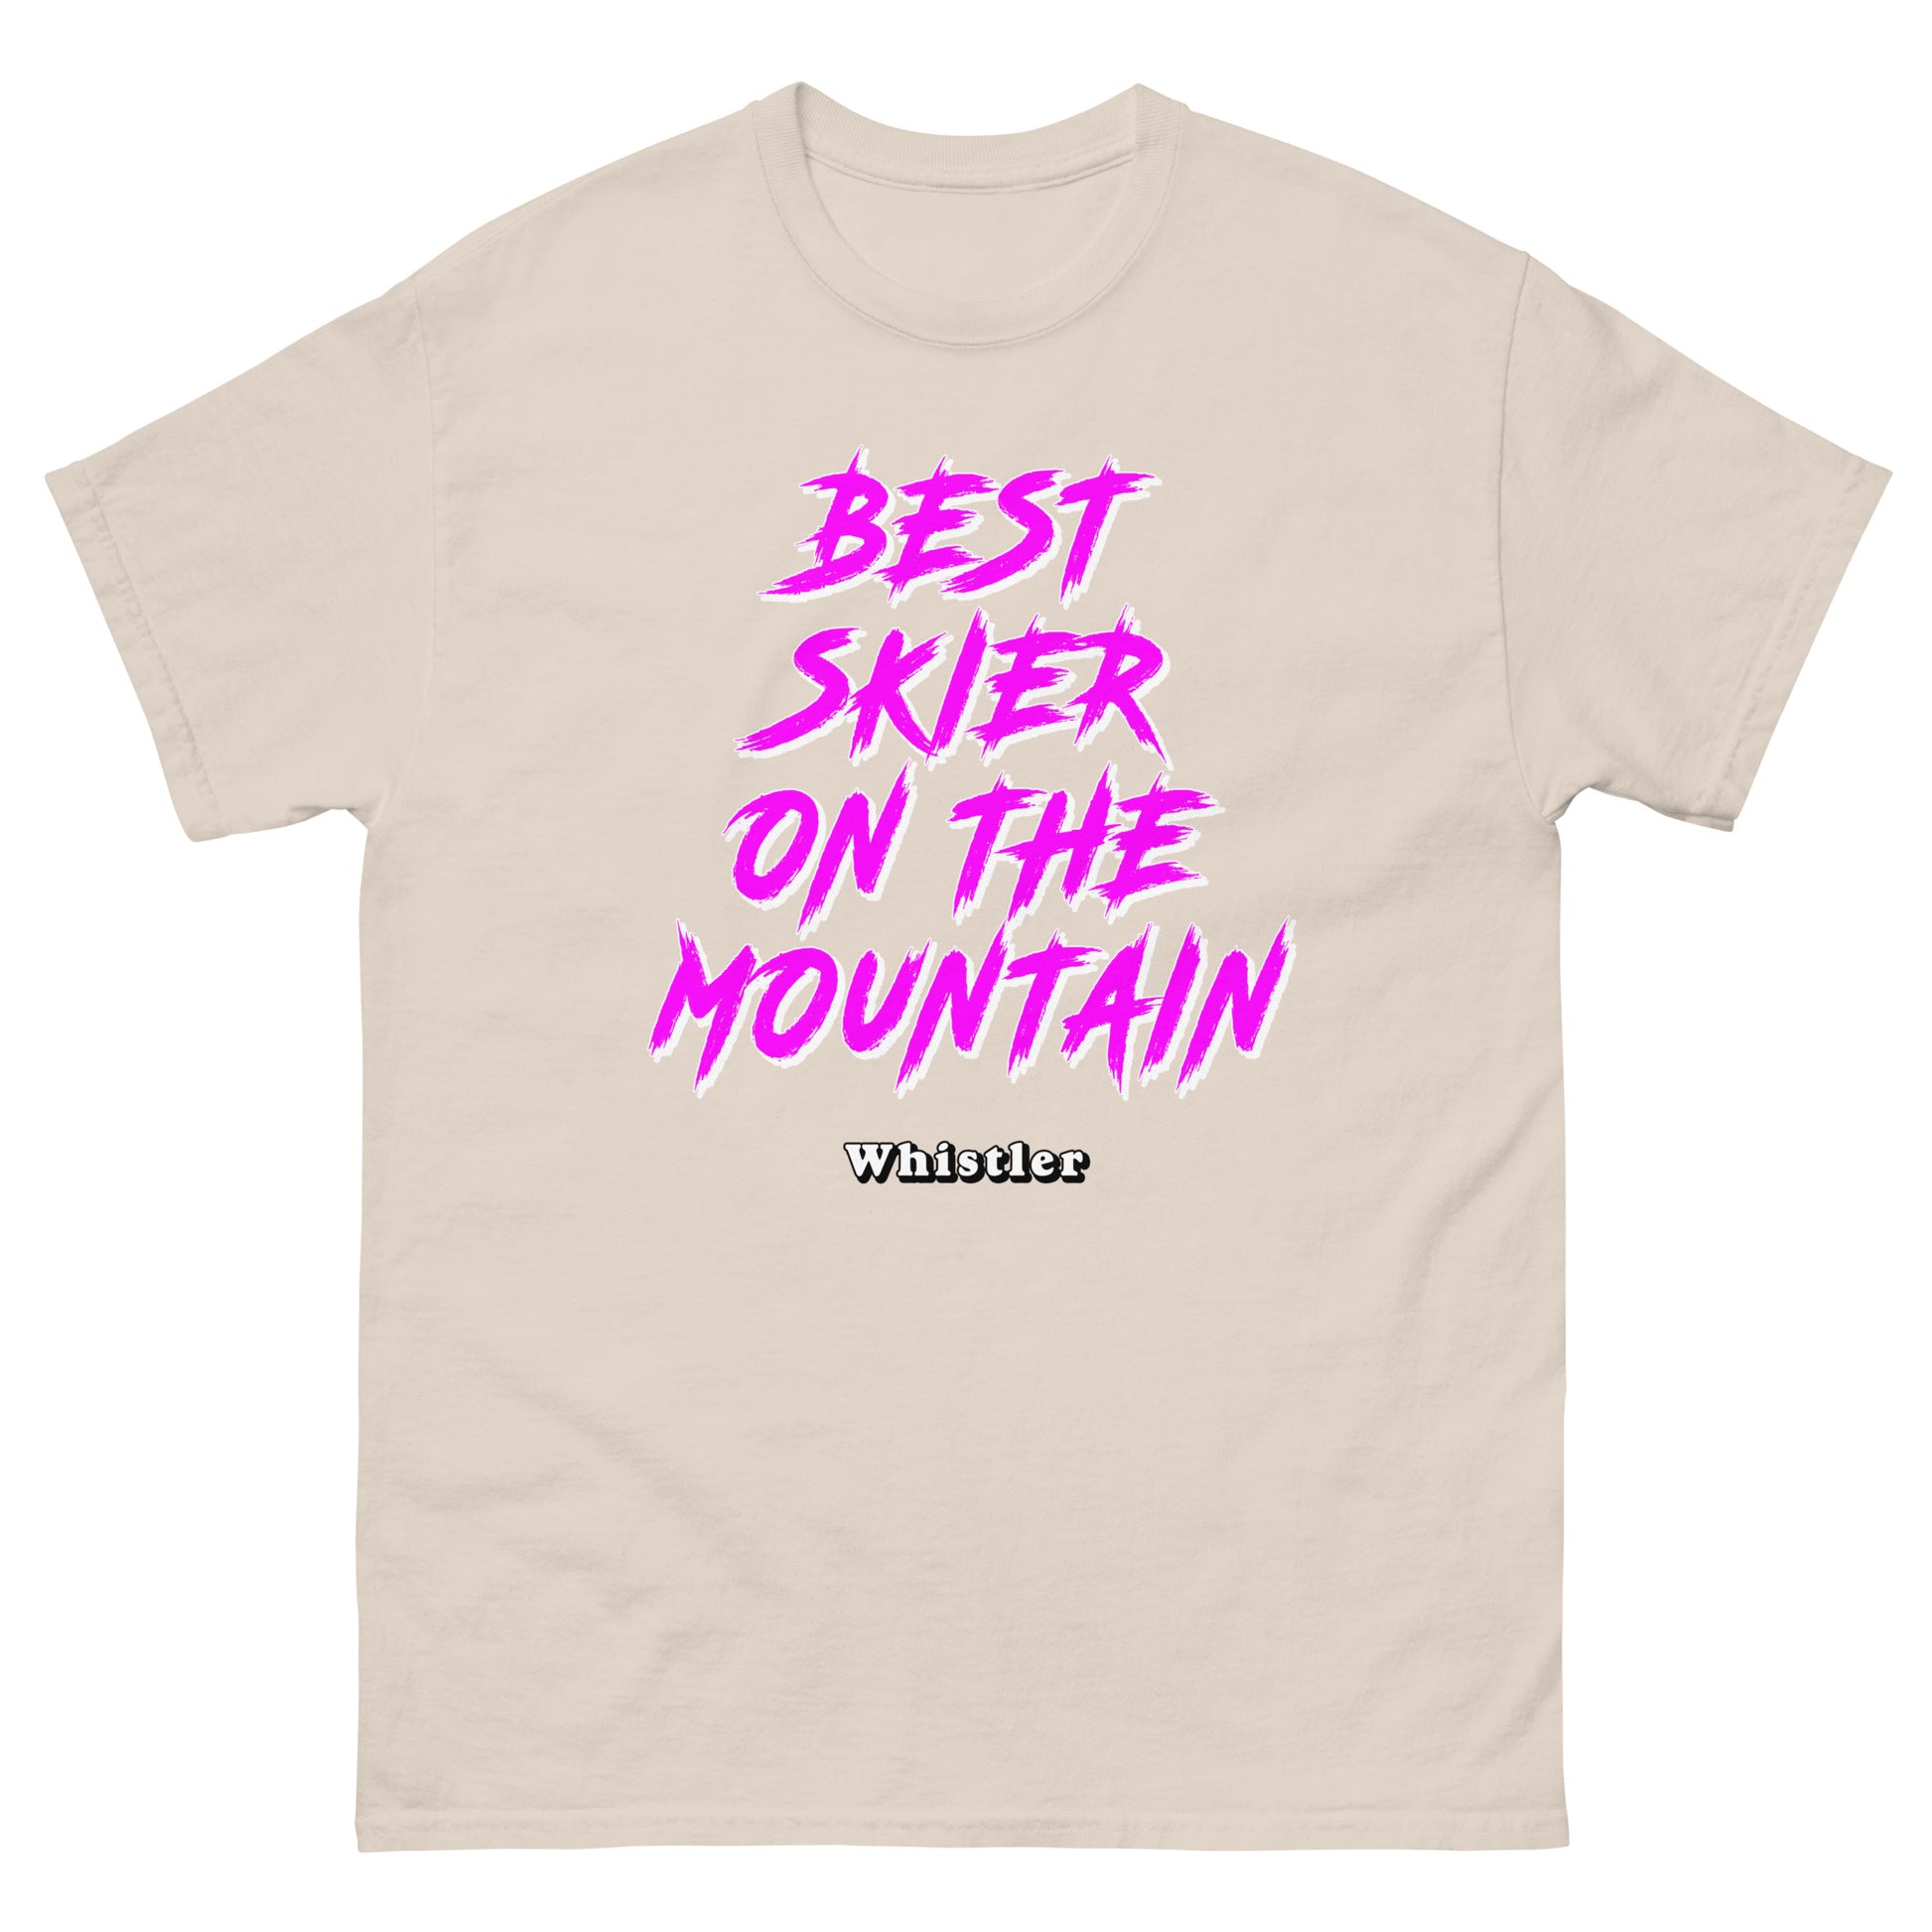 Best Skiier on the mountain whistler design printed on a t-shirt by Whistler Shirts